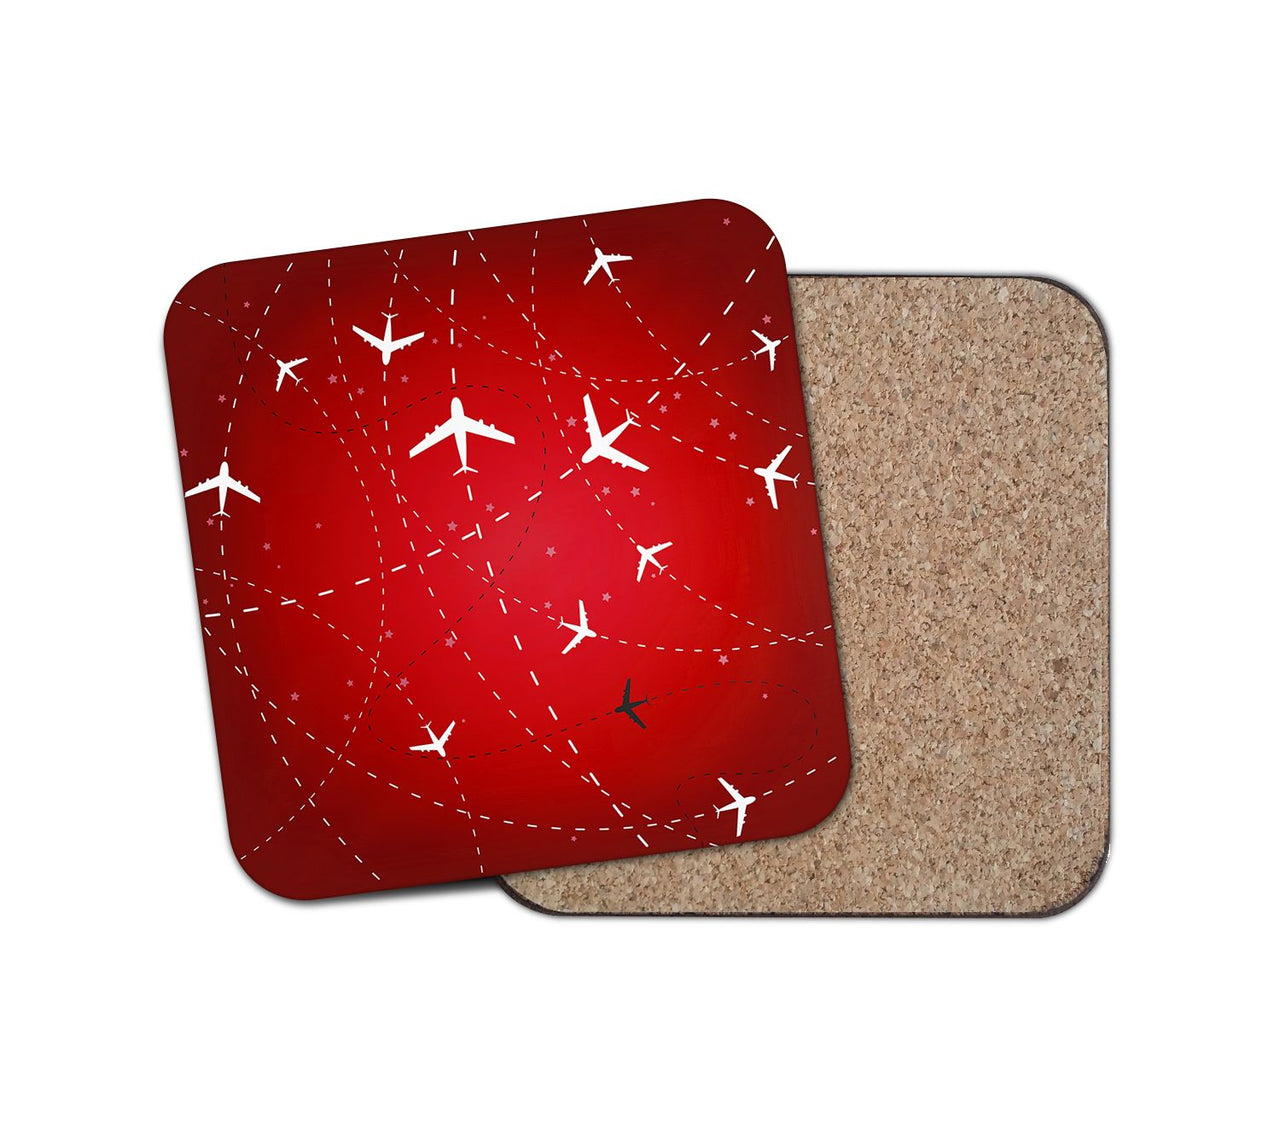 Travelling with Aircraft (Red) Designed Coasters